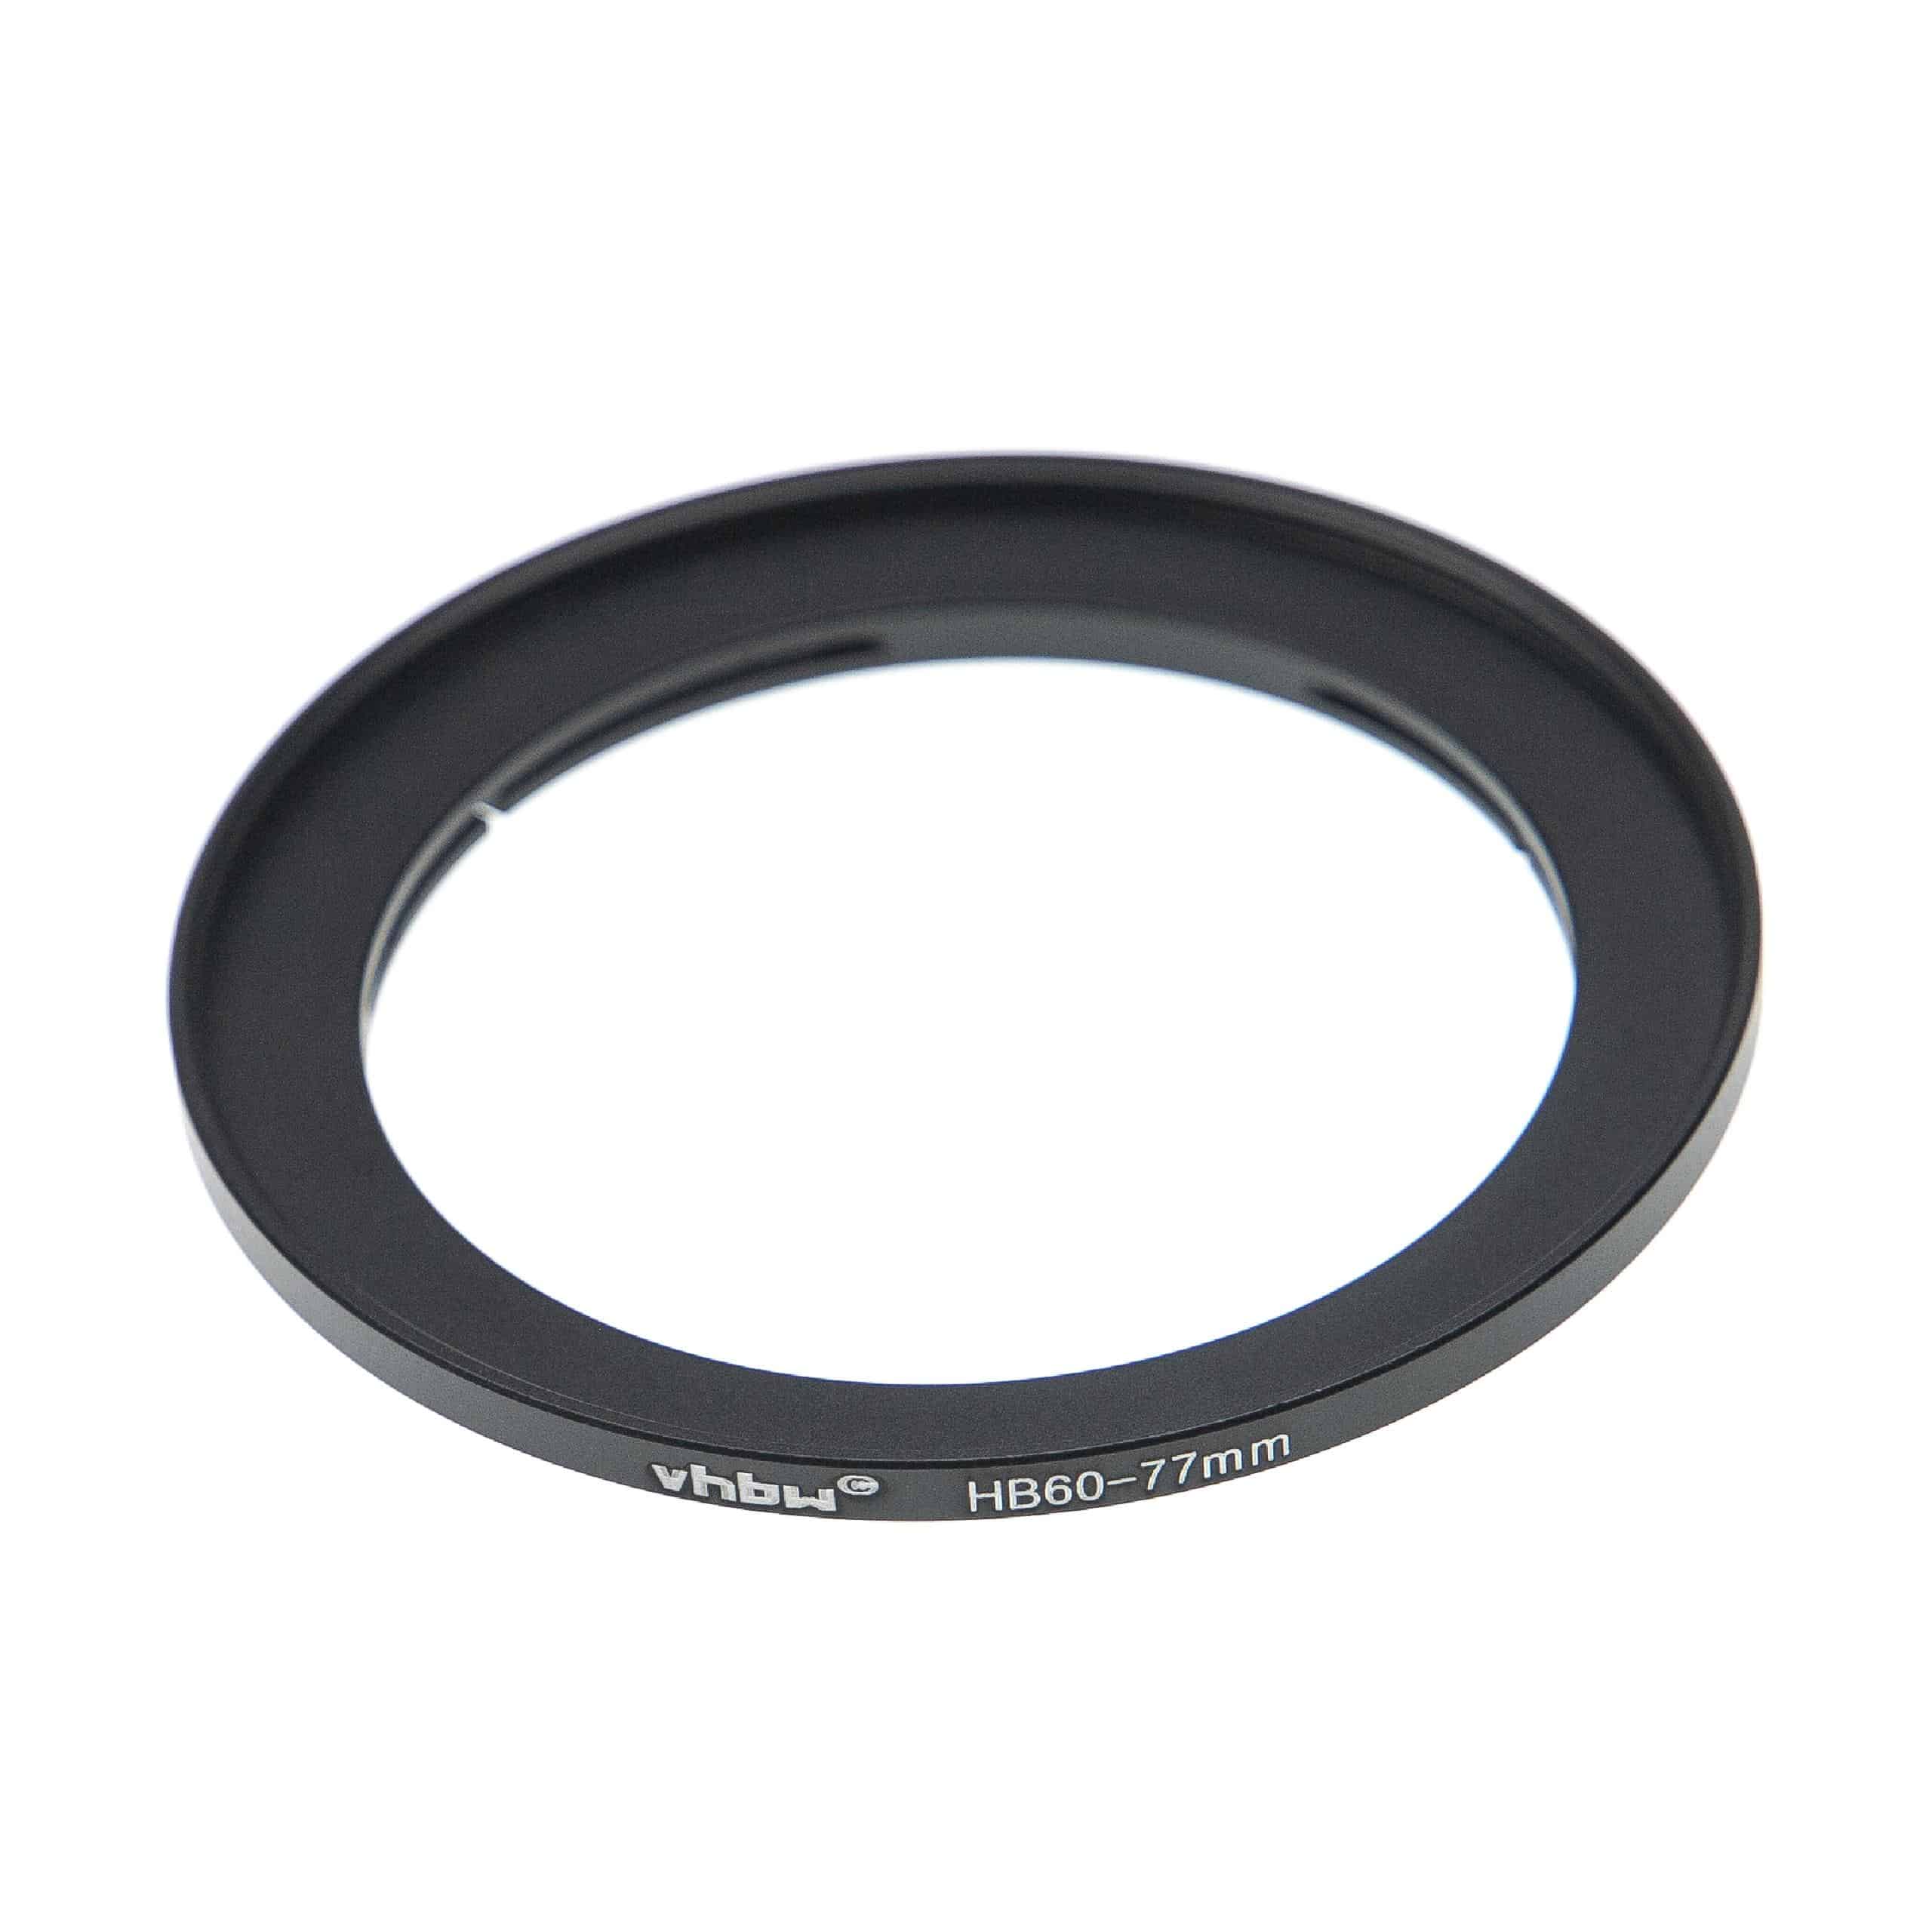 77 mm Filter Adapter suitable for Hasselblad B60 bayonet Camera Lens